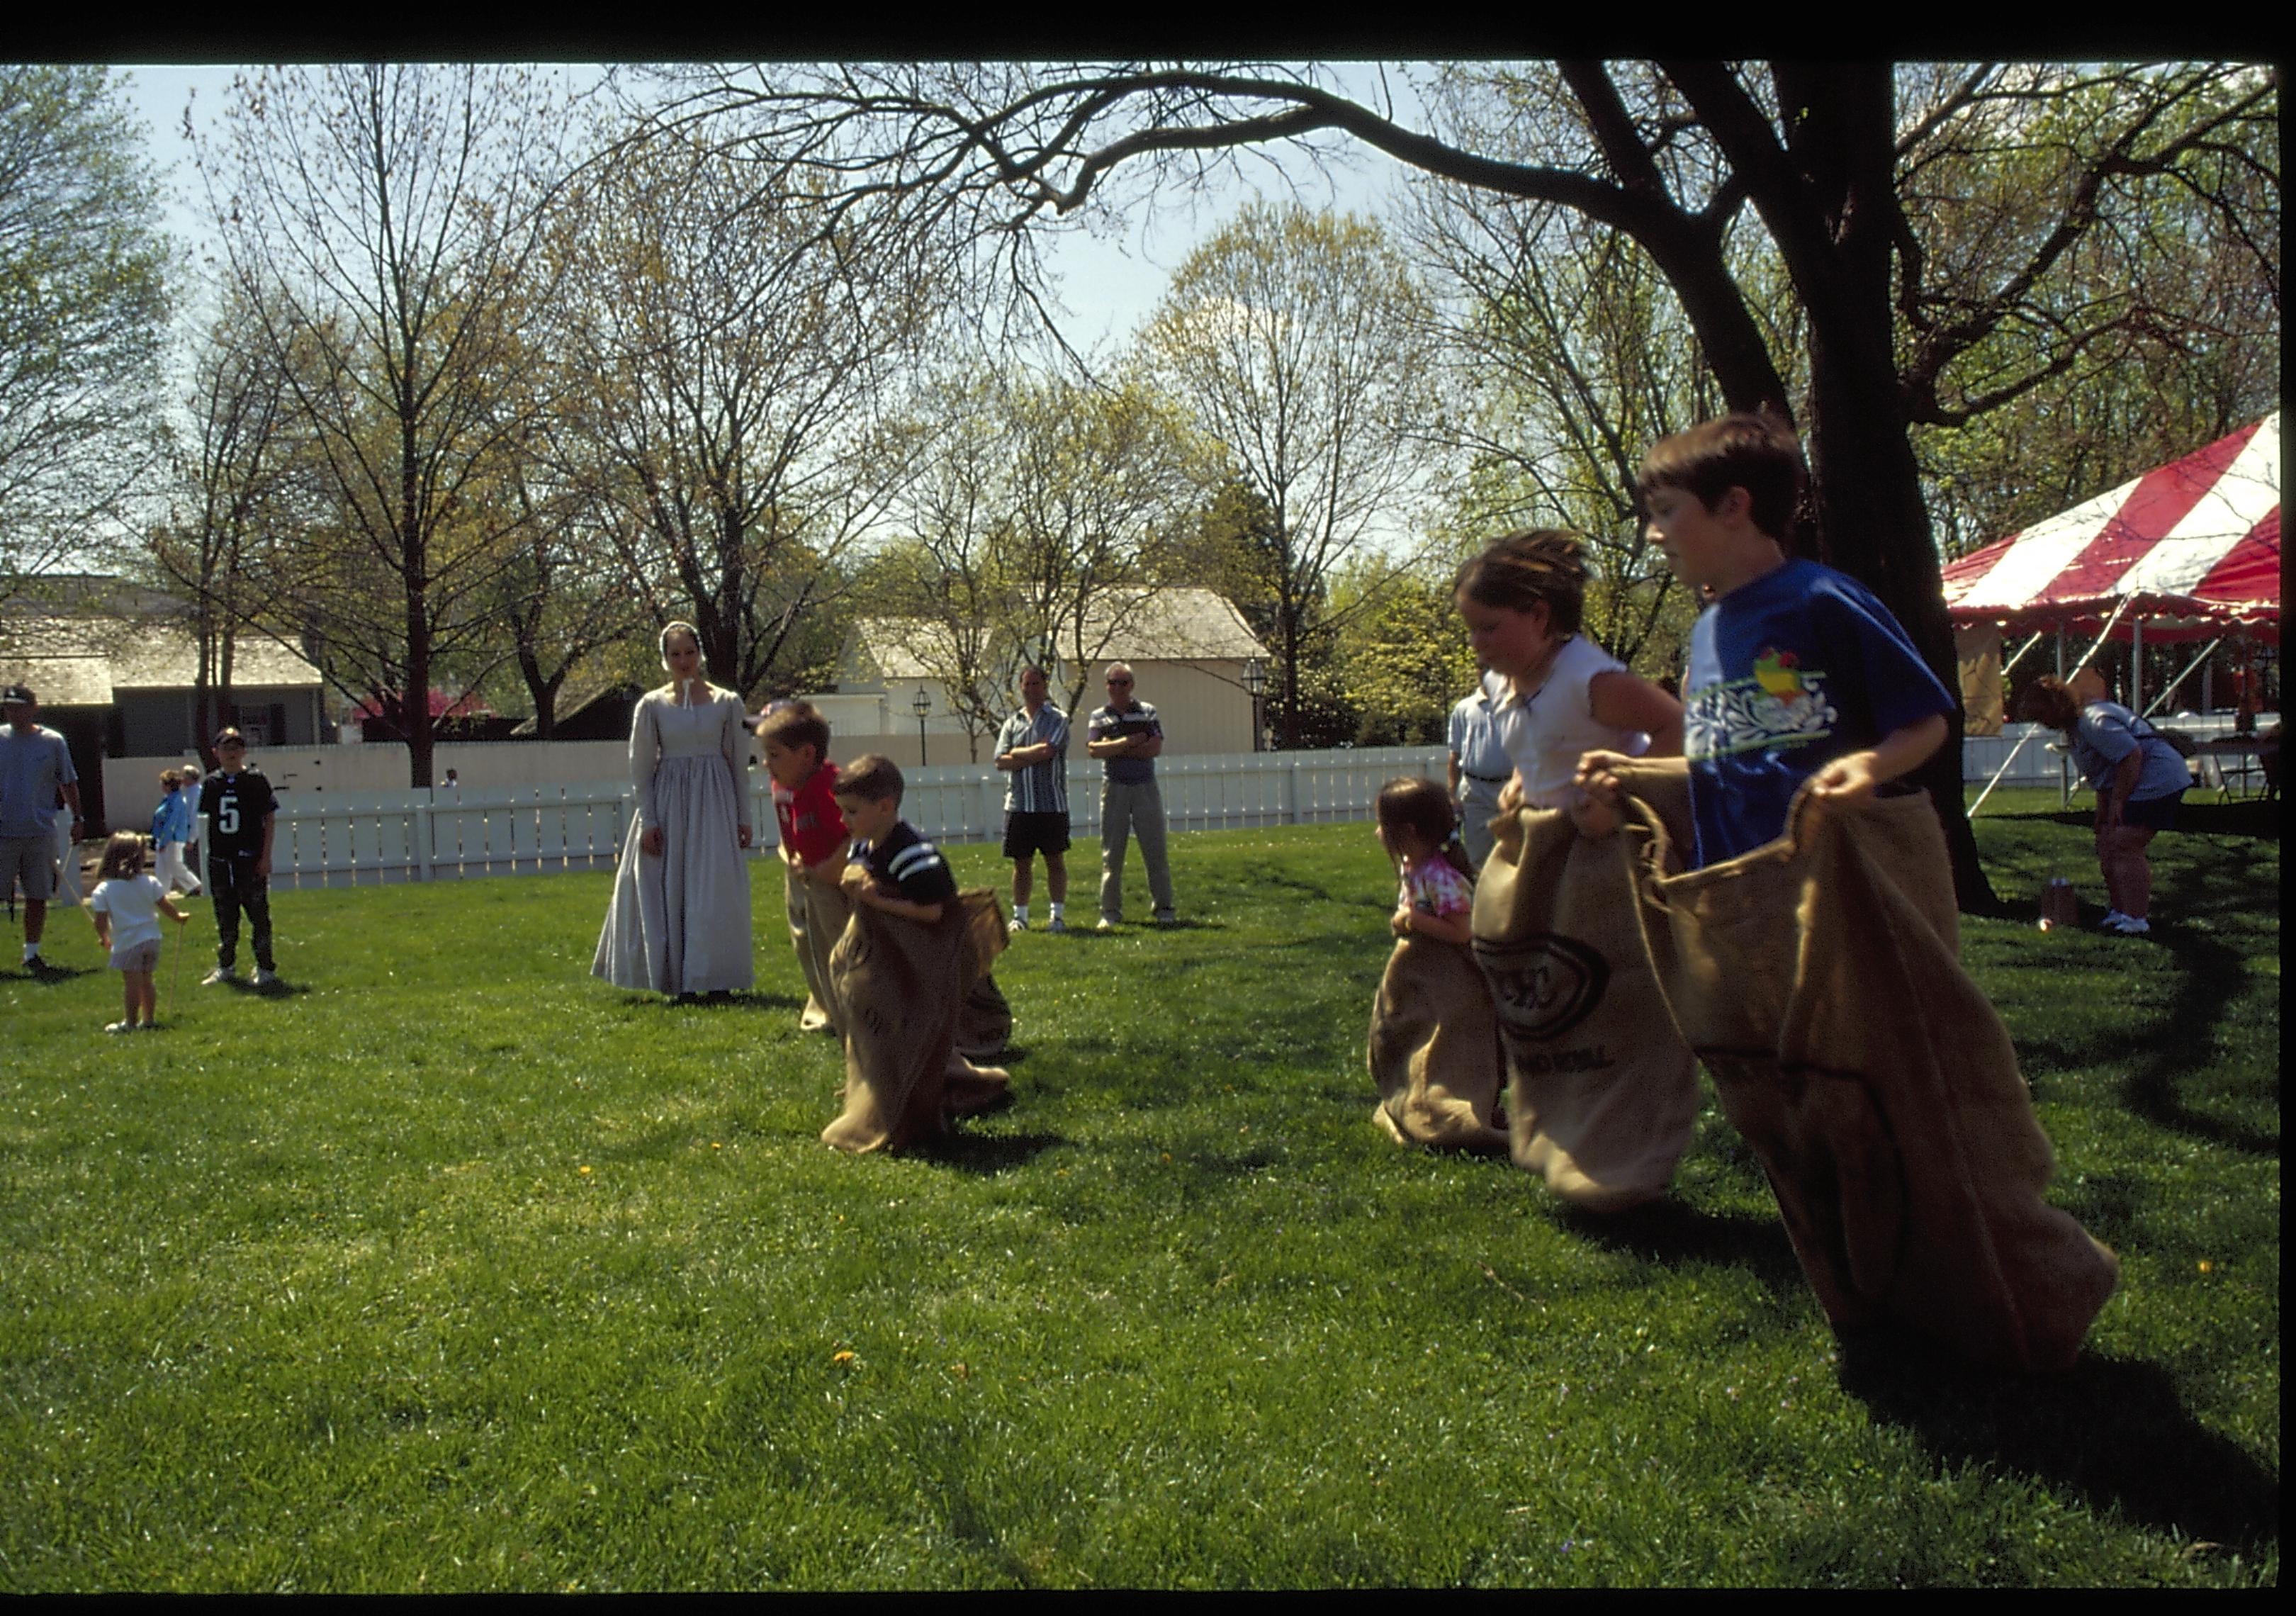 NA Lincoln Home NHS- Presidential Museum Opening Presidential Museum, sack race, games